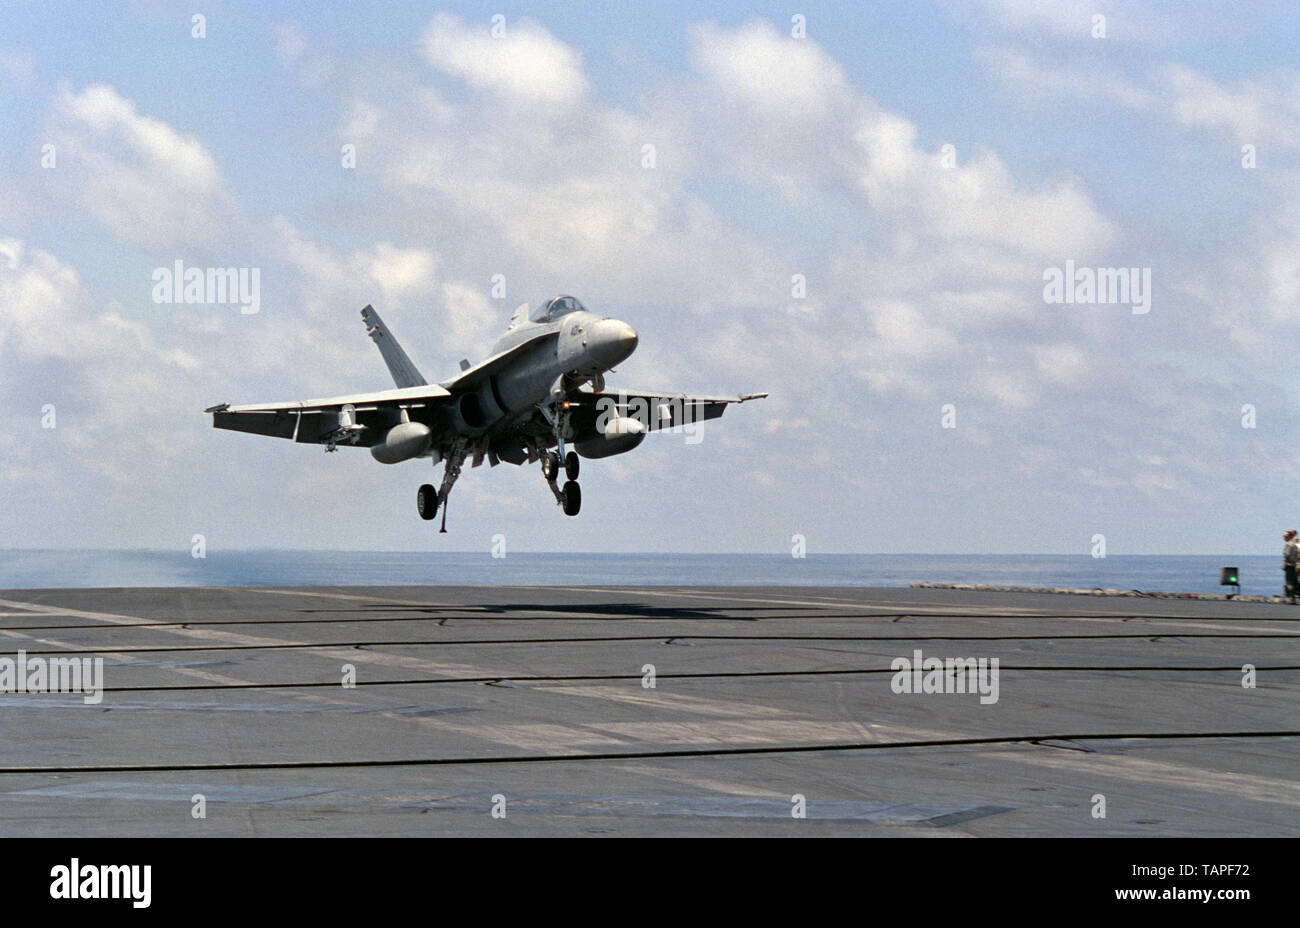 1st November 1993 Operation Continue Hope. An F/A-18 Hornet lands on the U.S. Navy aircraft carrier USS Abraham Lincoln in the Indian Ocean, 50 miles off Mogadishu, Somalia. Stock Photo